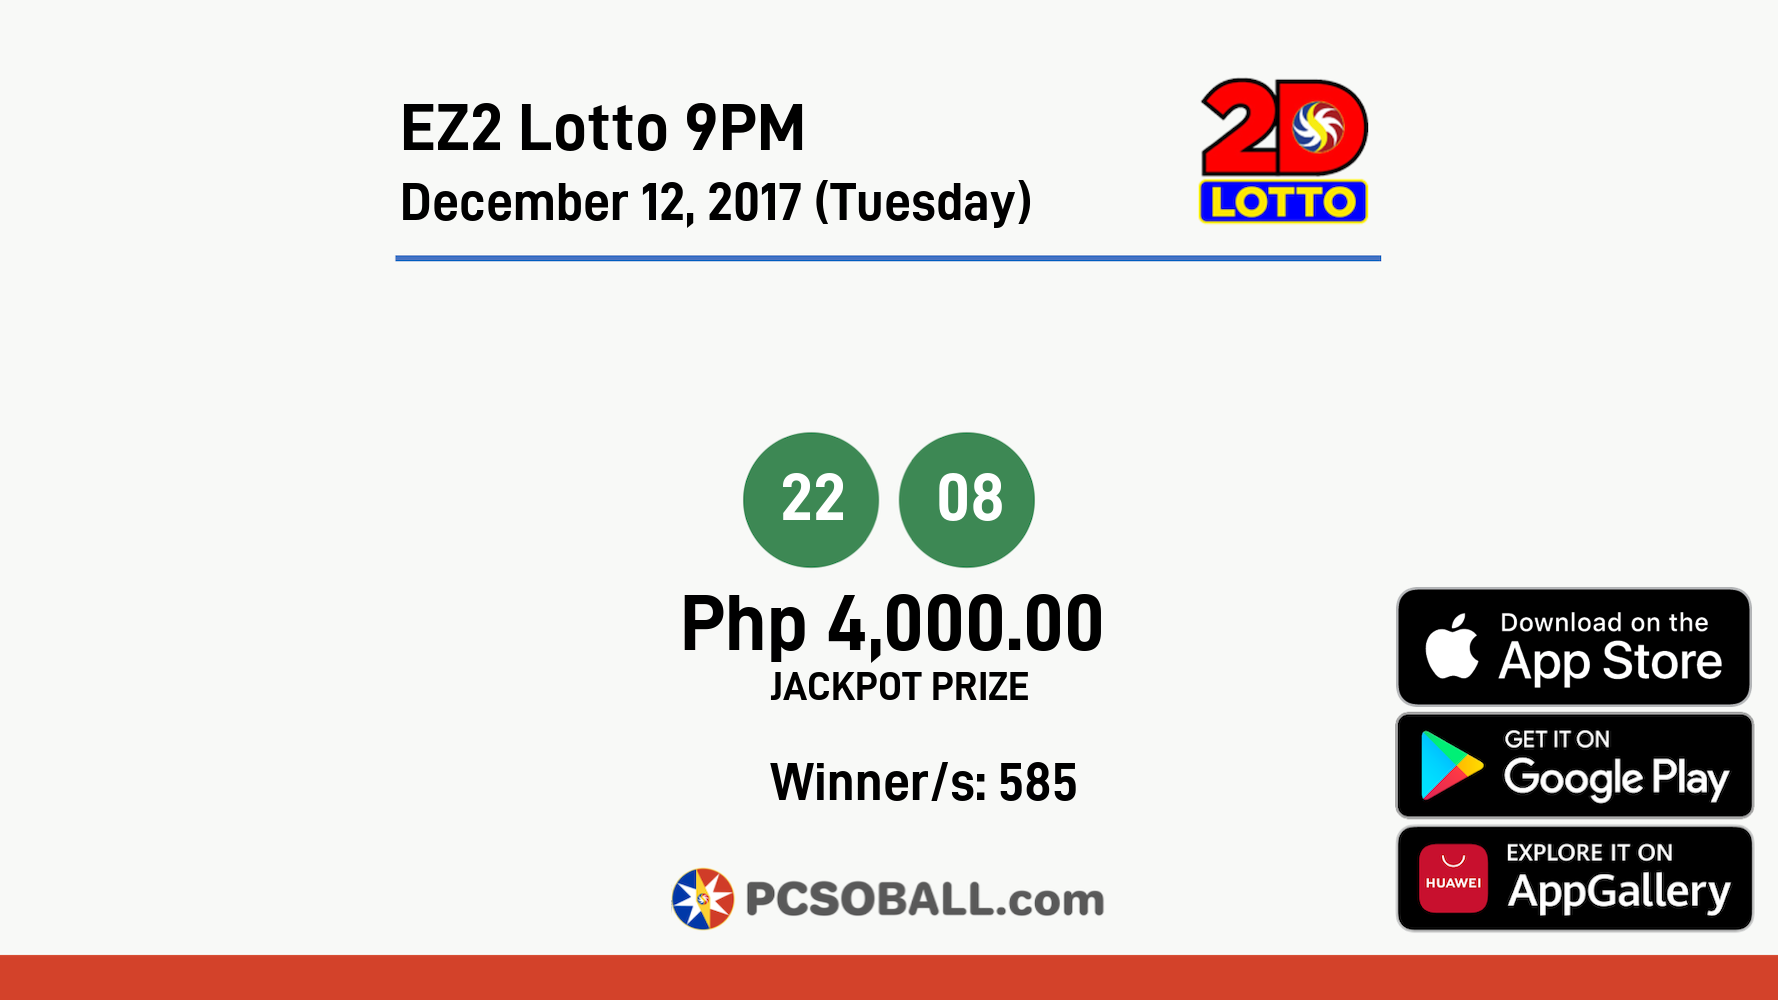 EZ2 Lotto 9PM December 12, 2017 (Tuesday) Result